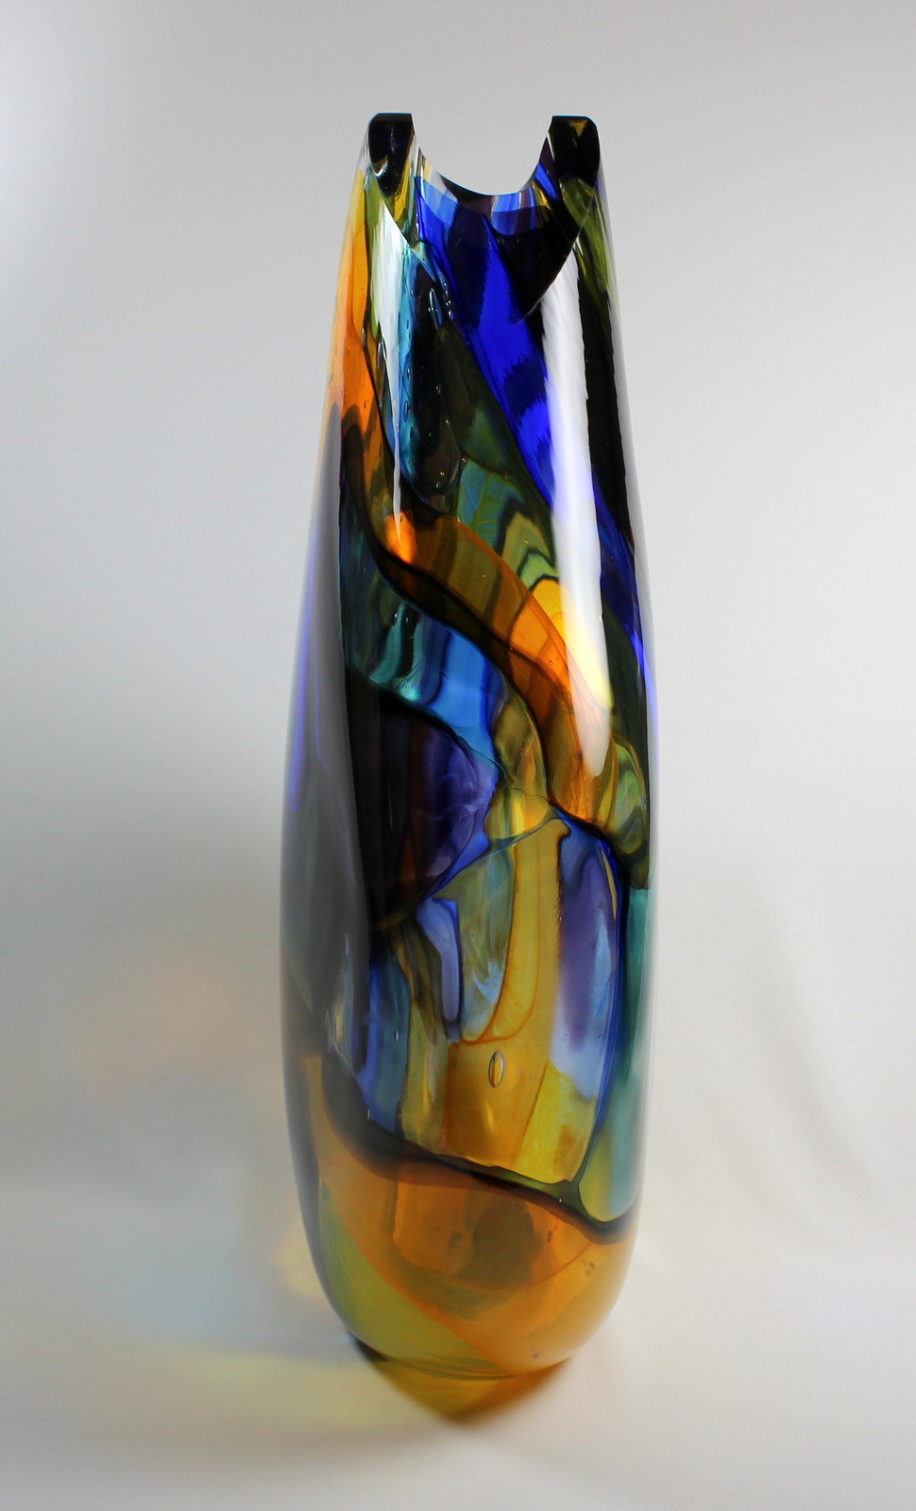 Stained Glass by Vase by Guy Hollington at The Avenue Gallery, a contemporary fine art gallery in Victoria, BC, Canada.